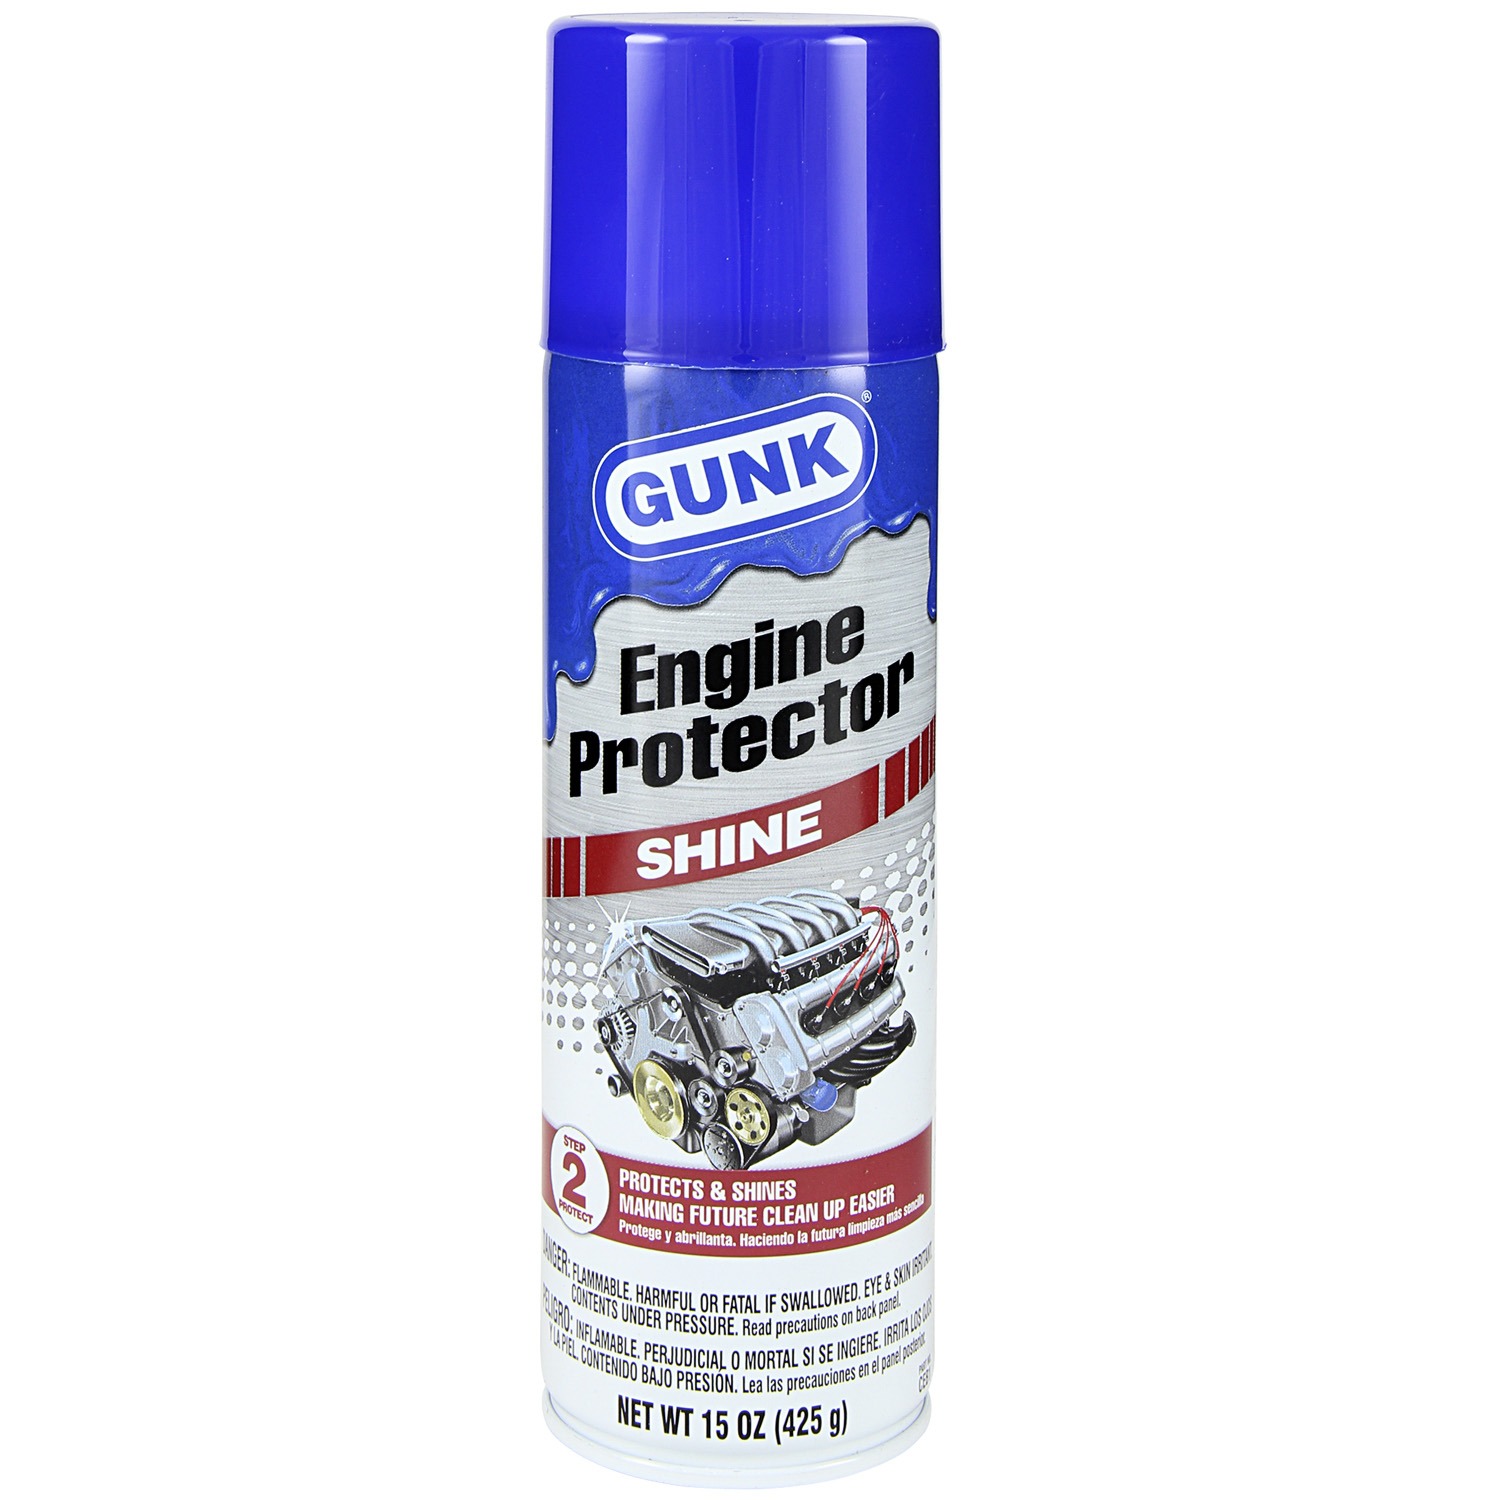 My Two Cents: Review: GUNK, ENGINE DEGREASER